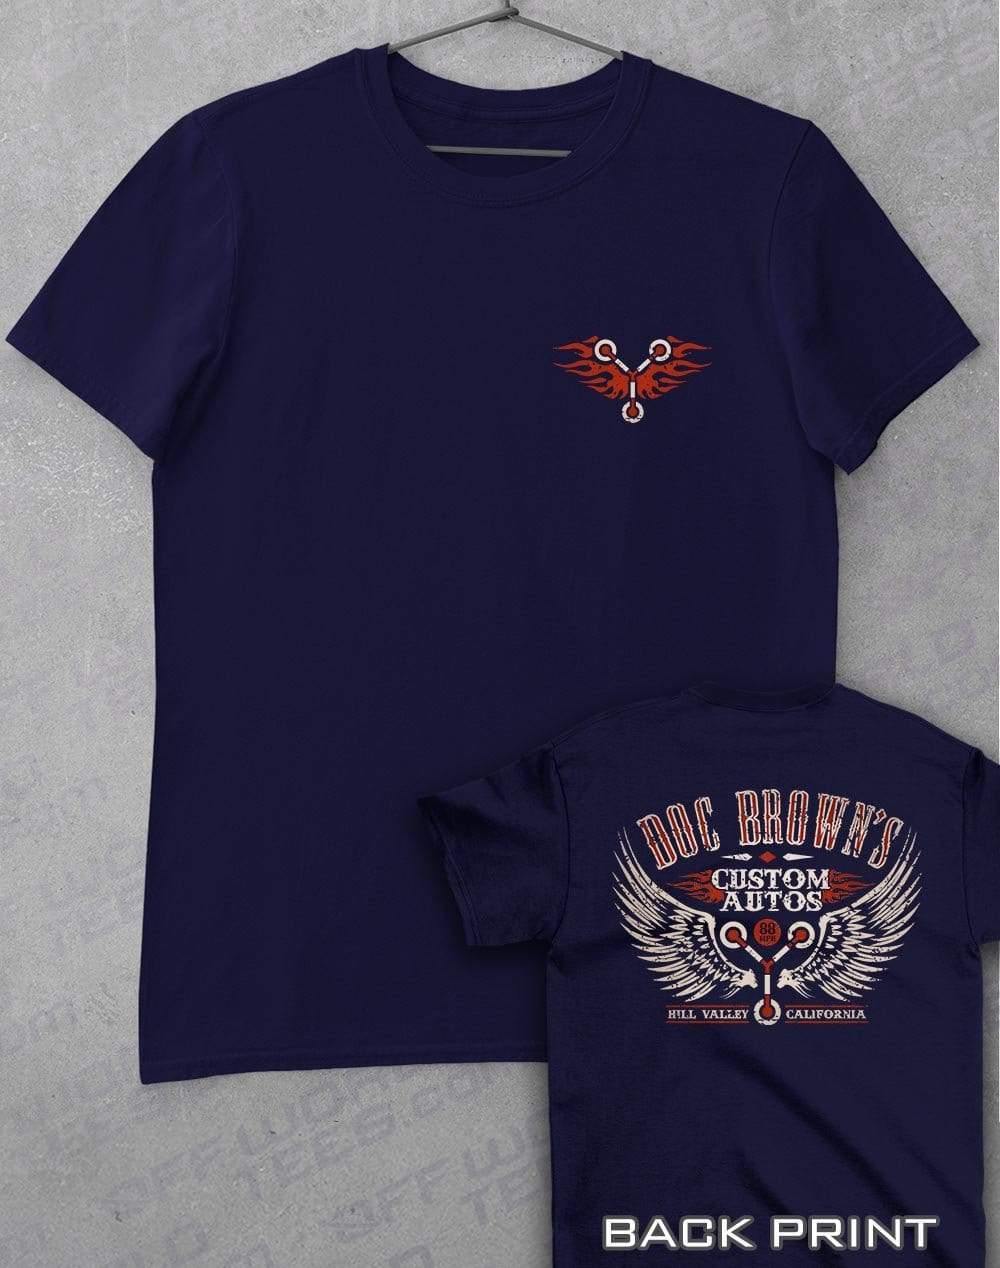 Doc Brown's Custom Autos with Back Print T-Shirt S / Navy  - Off World Tees